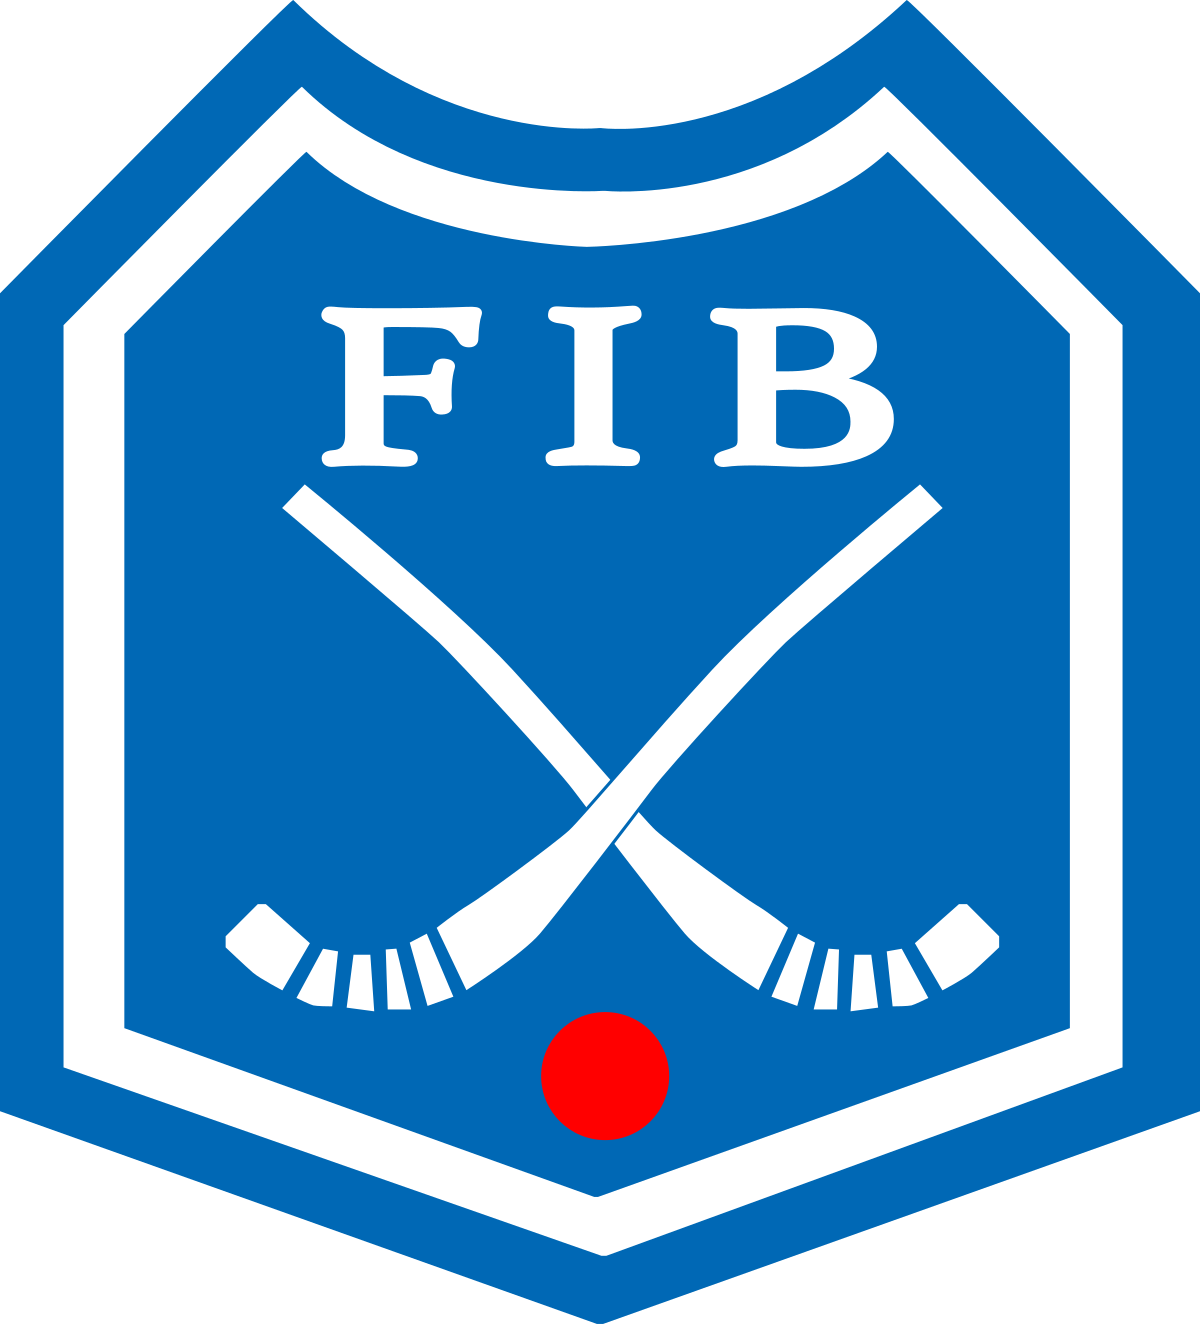 Sweden are clear favourites to win the Women’s Bandy World Championship ©FIB